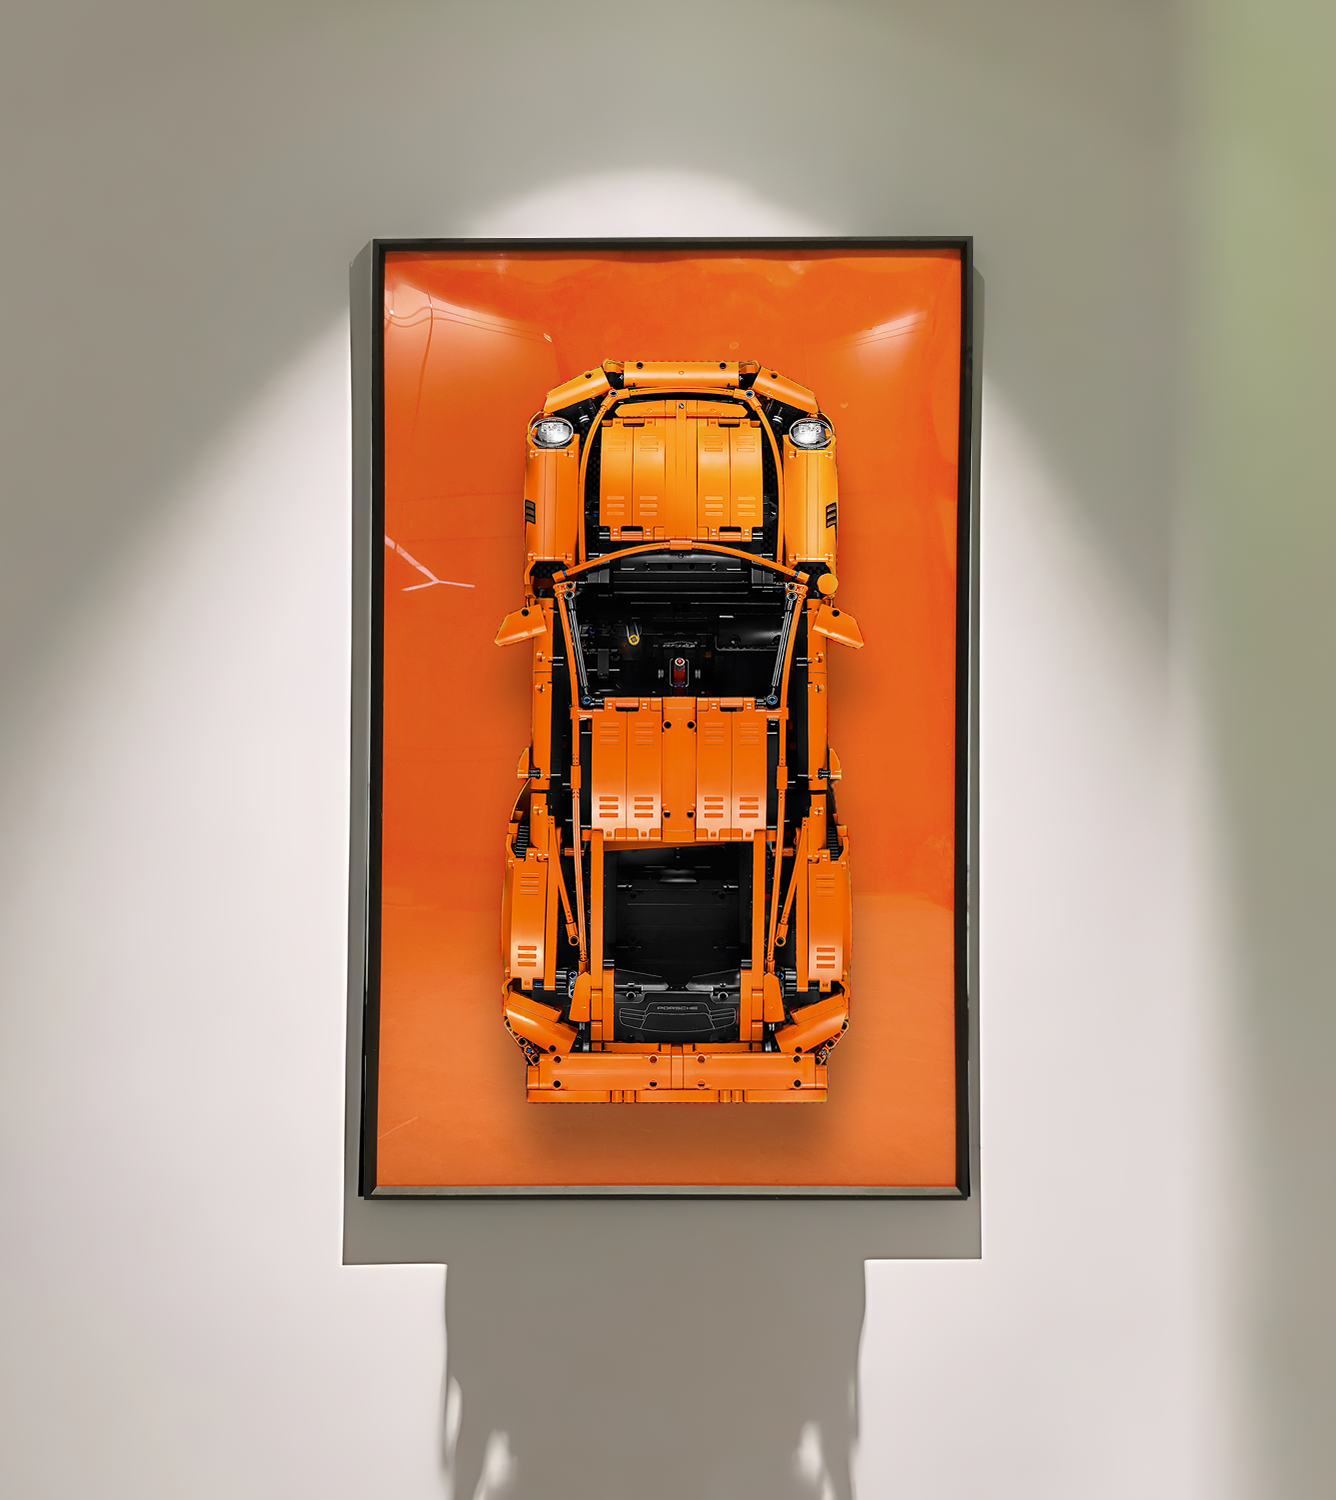 Display Wall board for LEGO 42056 CAR Porsche 911 GT3 RS